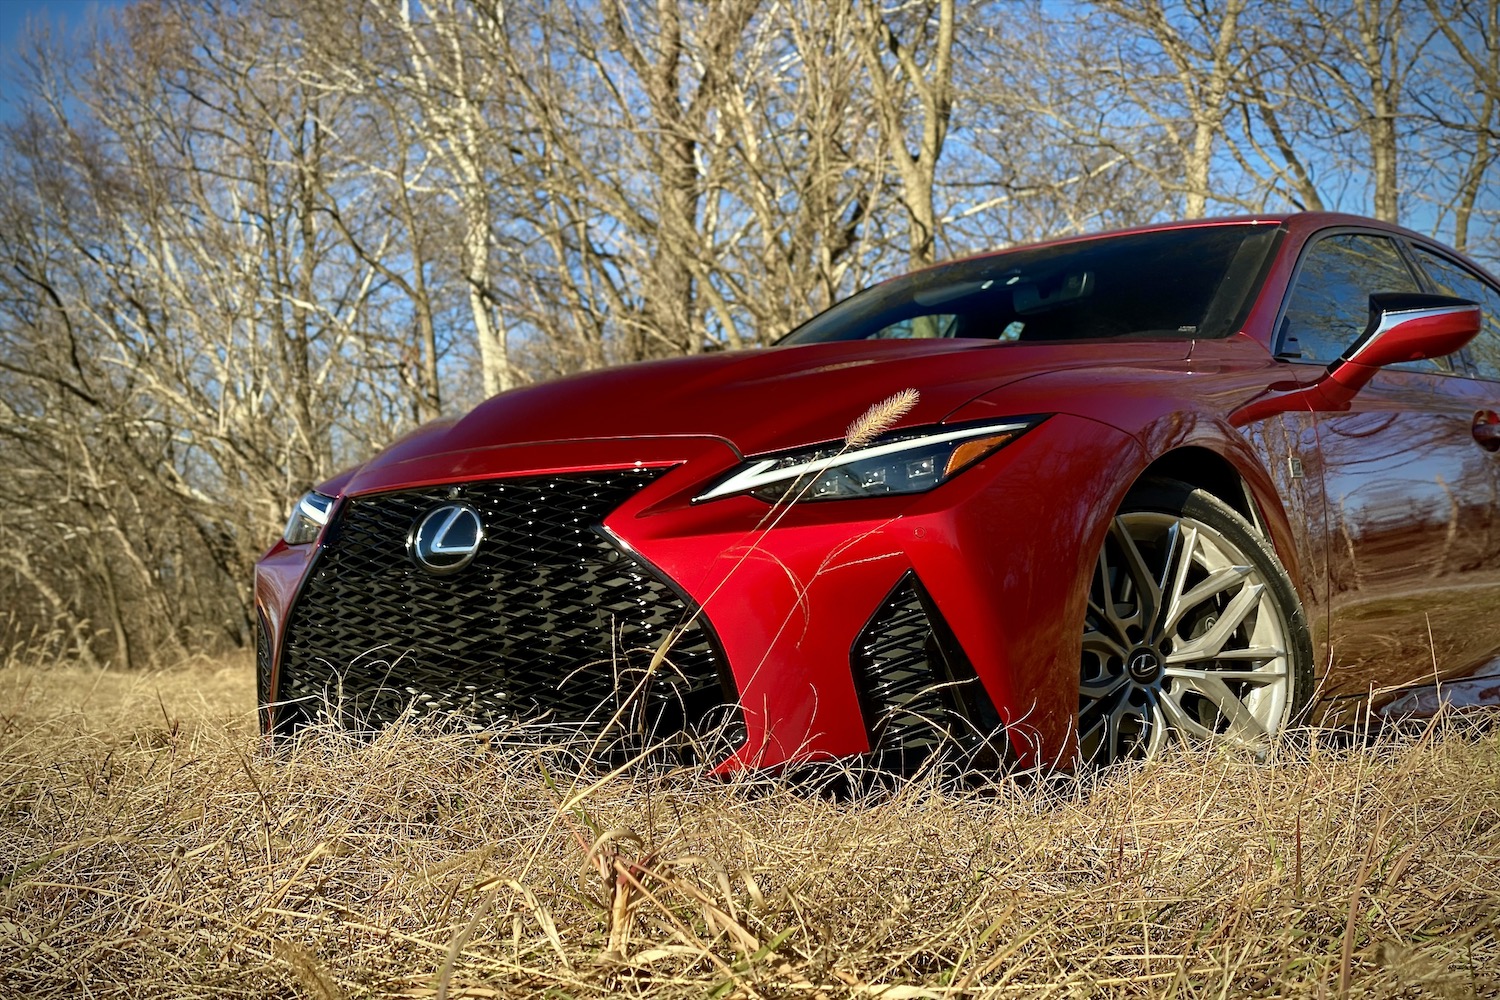 Front end of Lexus IS 500 in a grassy field from driver's side.